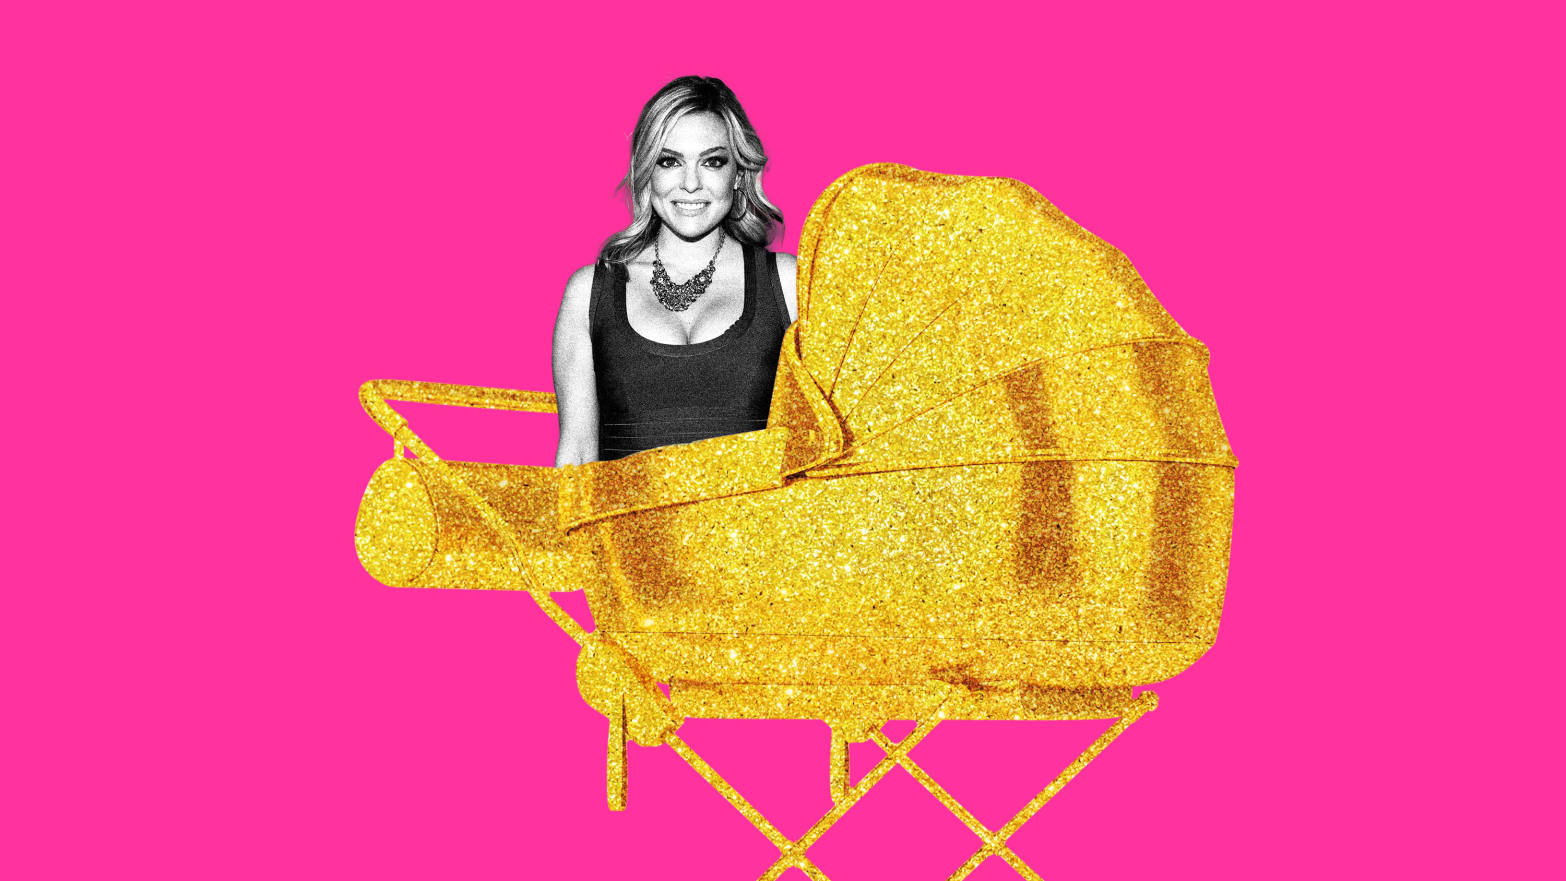 A photo illustration of Carly Reeves in a baby stroller